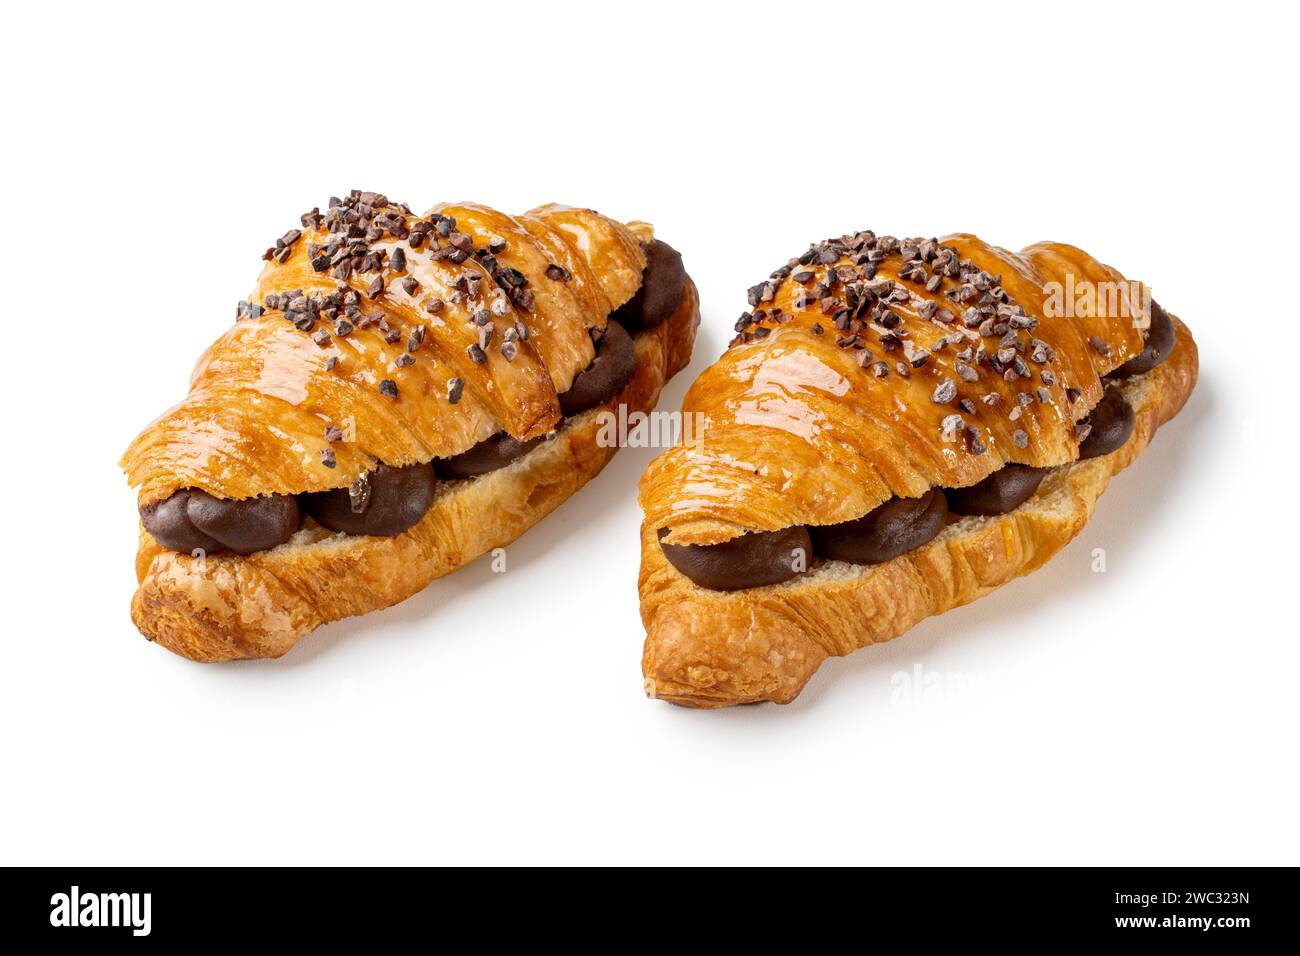 Delight in the flaky goodness of two chocolate-filled croissants. The rich cocoa layers offer a gourmet treat, ideal for showcasing French pastry mast Stock Photo